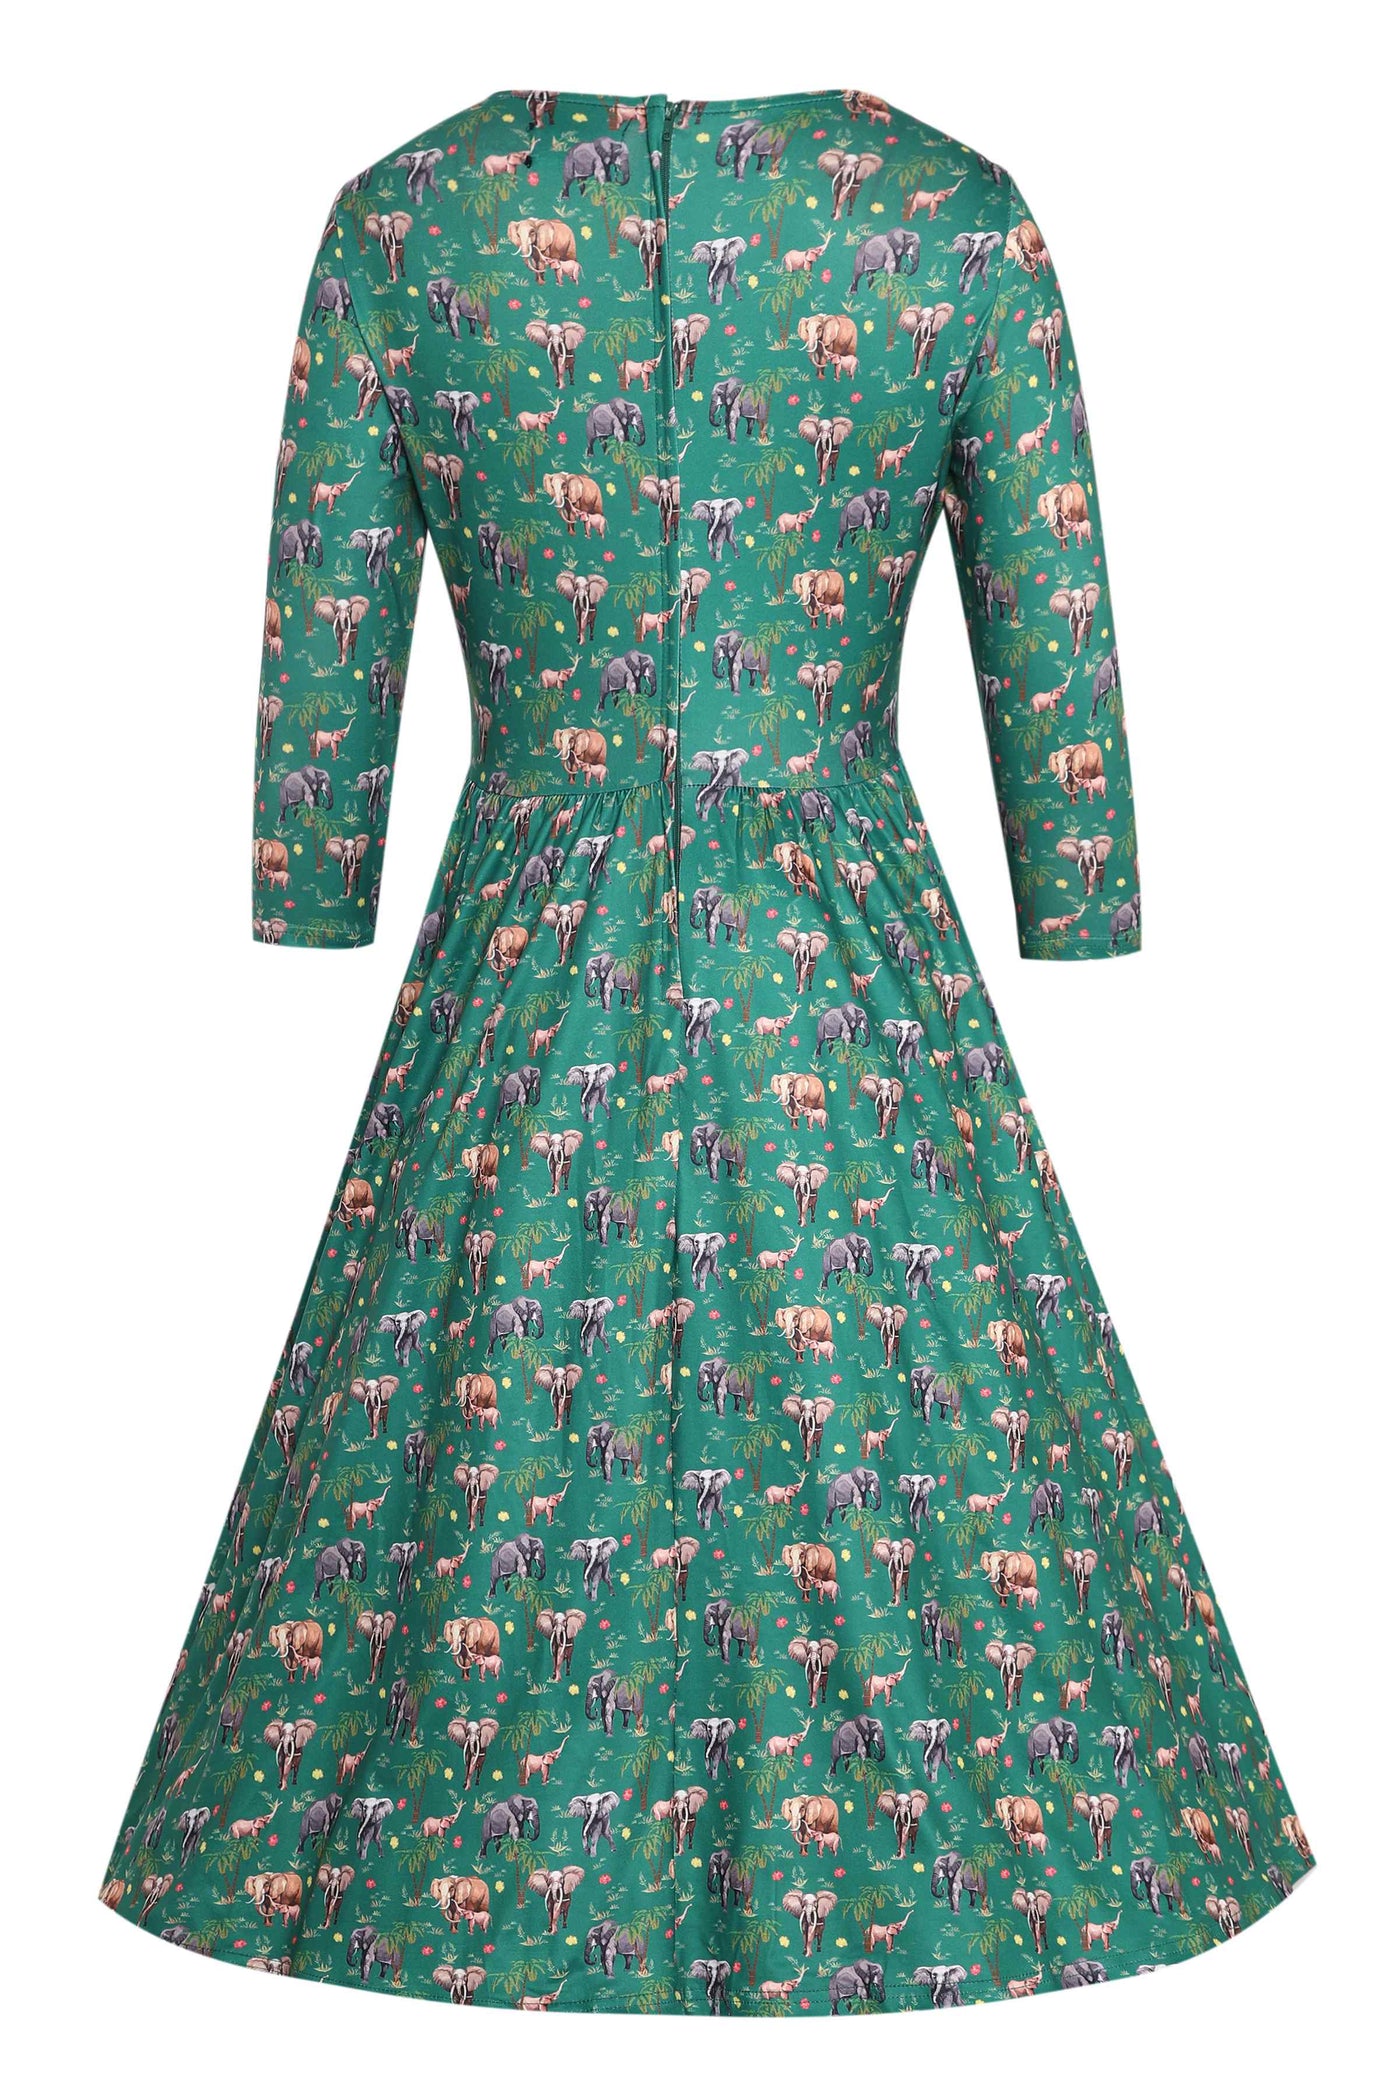 Back view of Elephant Print Flared Dress in Green